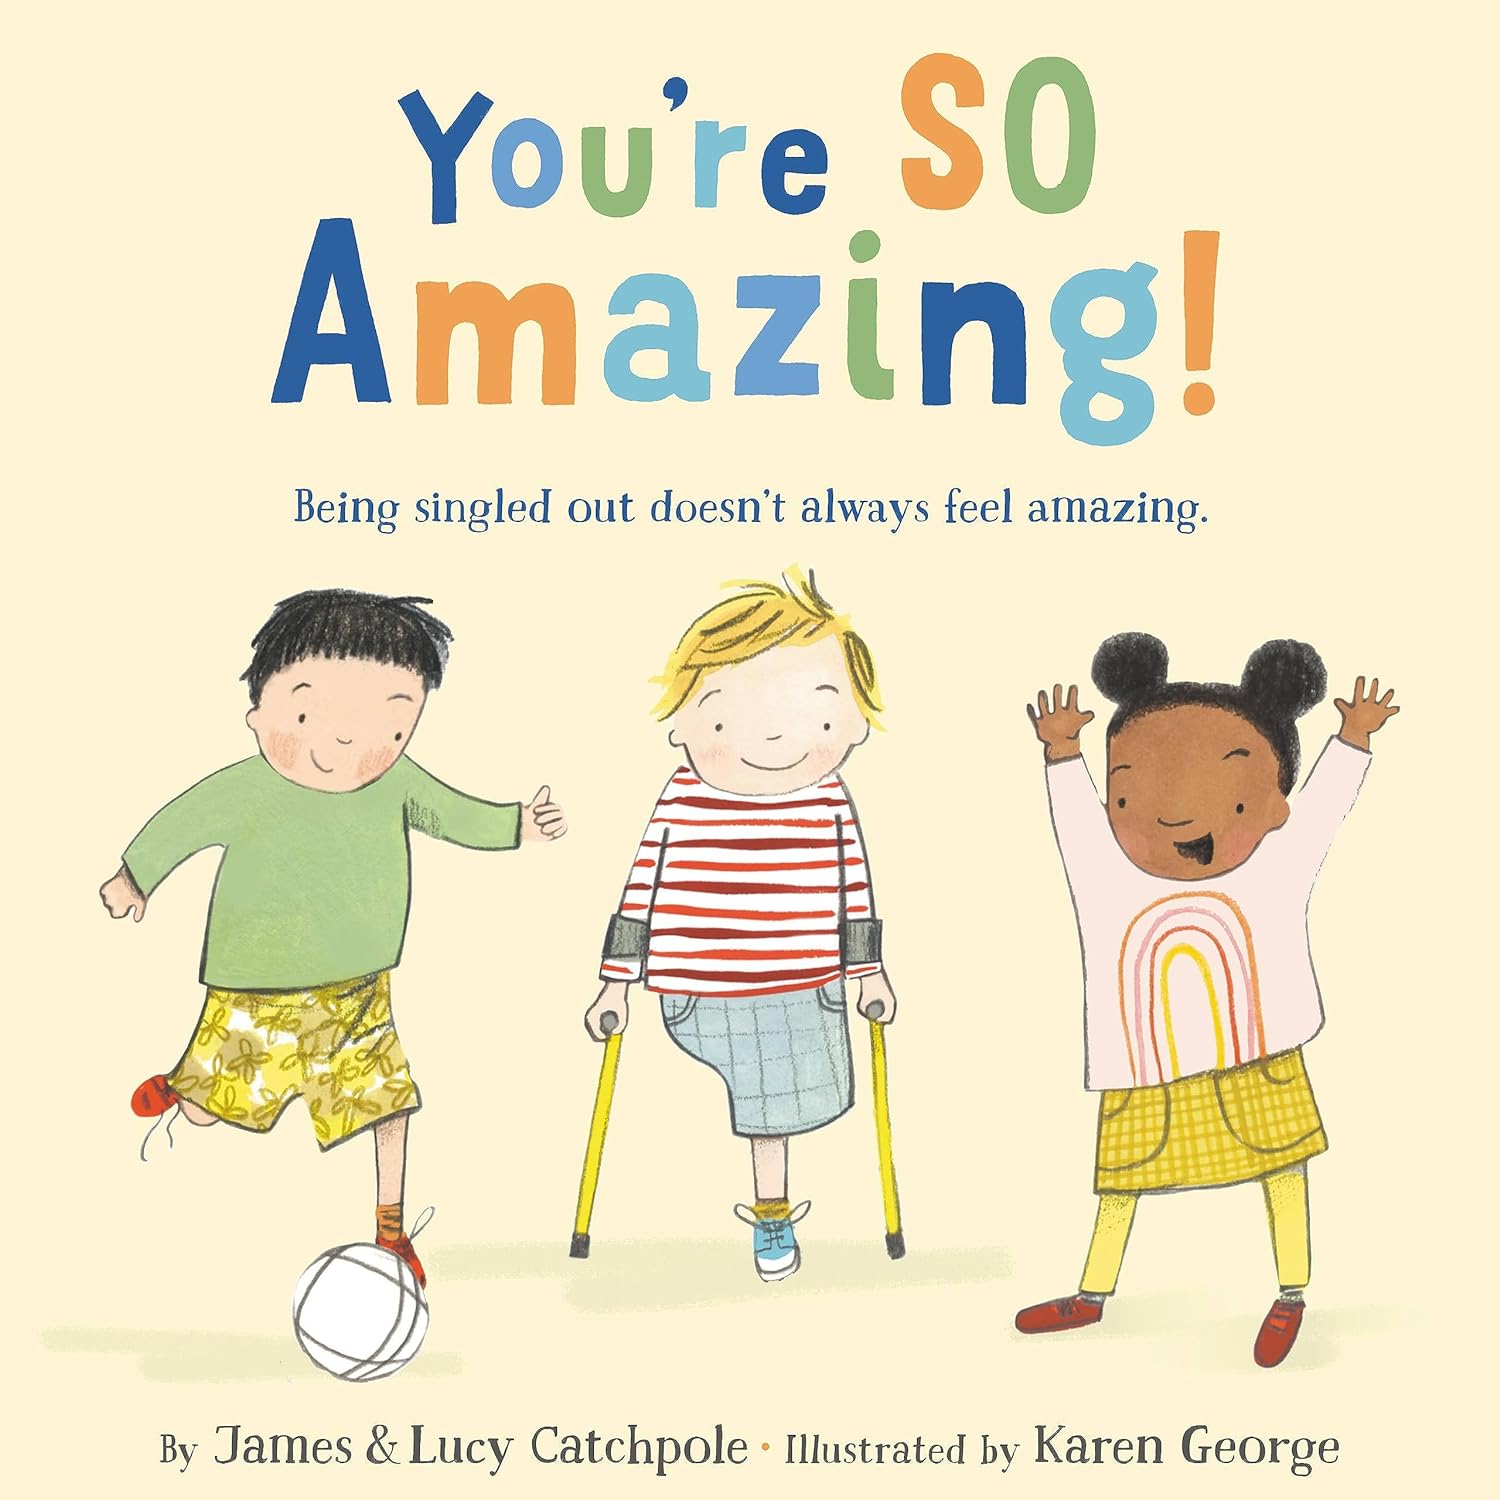 Image for "You're SO Amazing!"